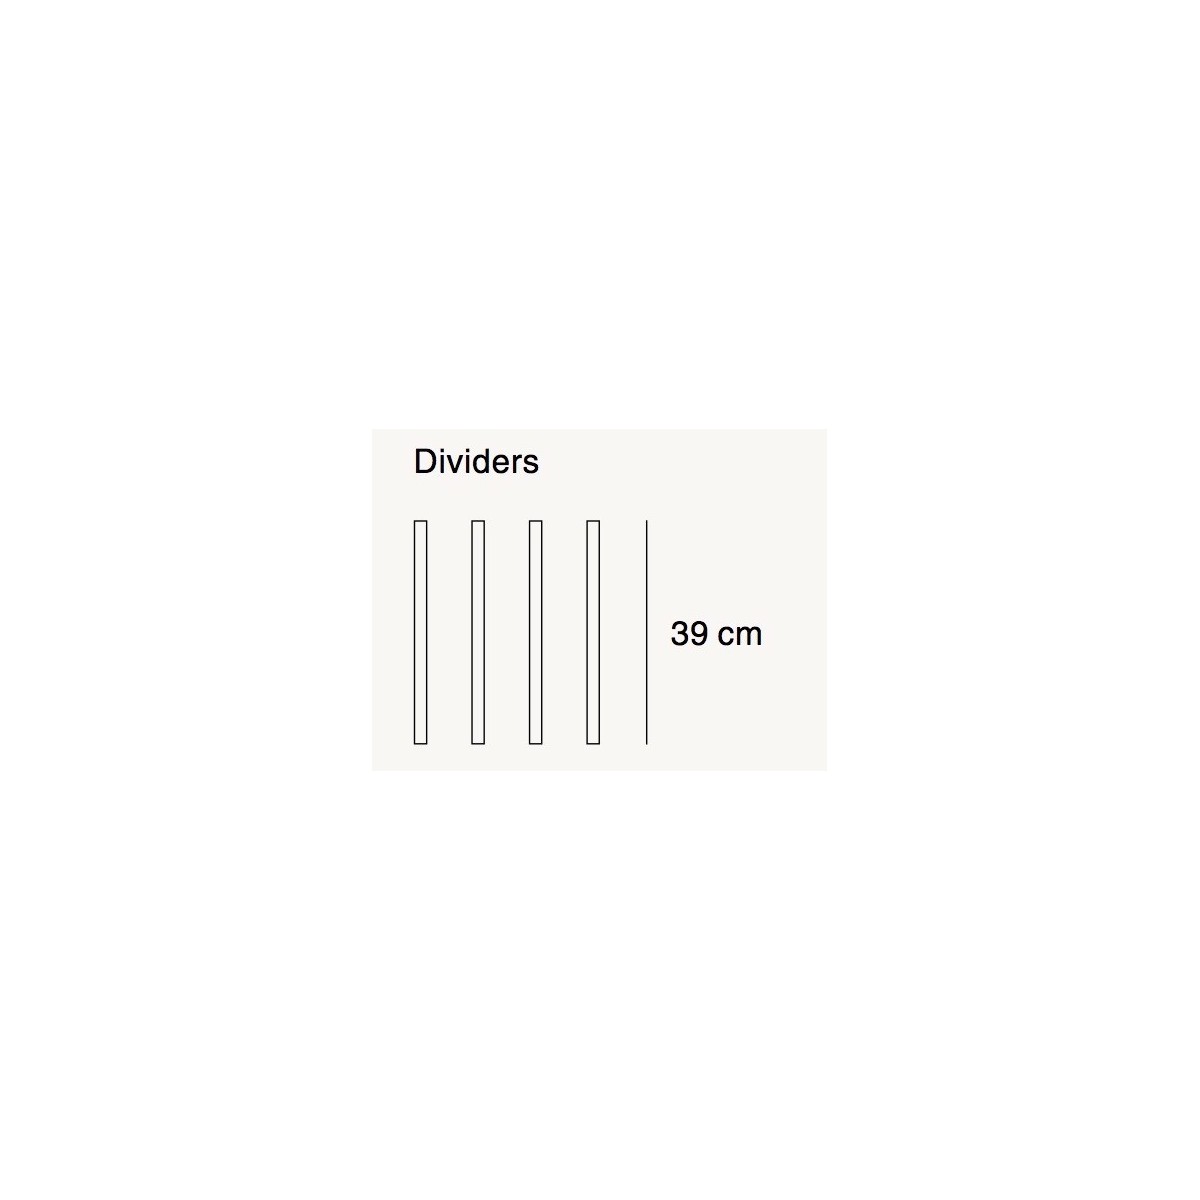 large - 4x dividers - Compile shelving system